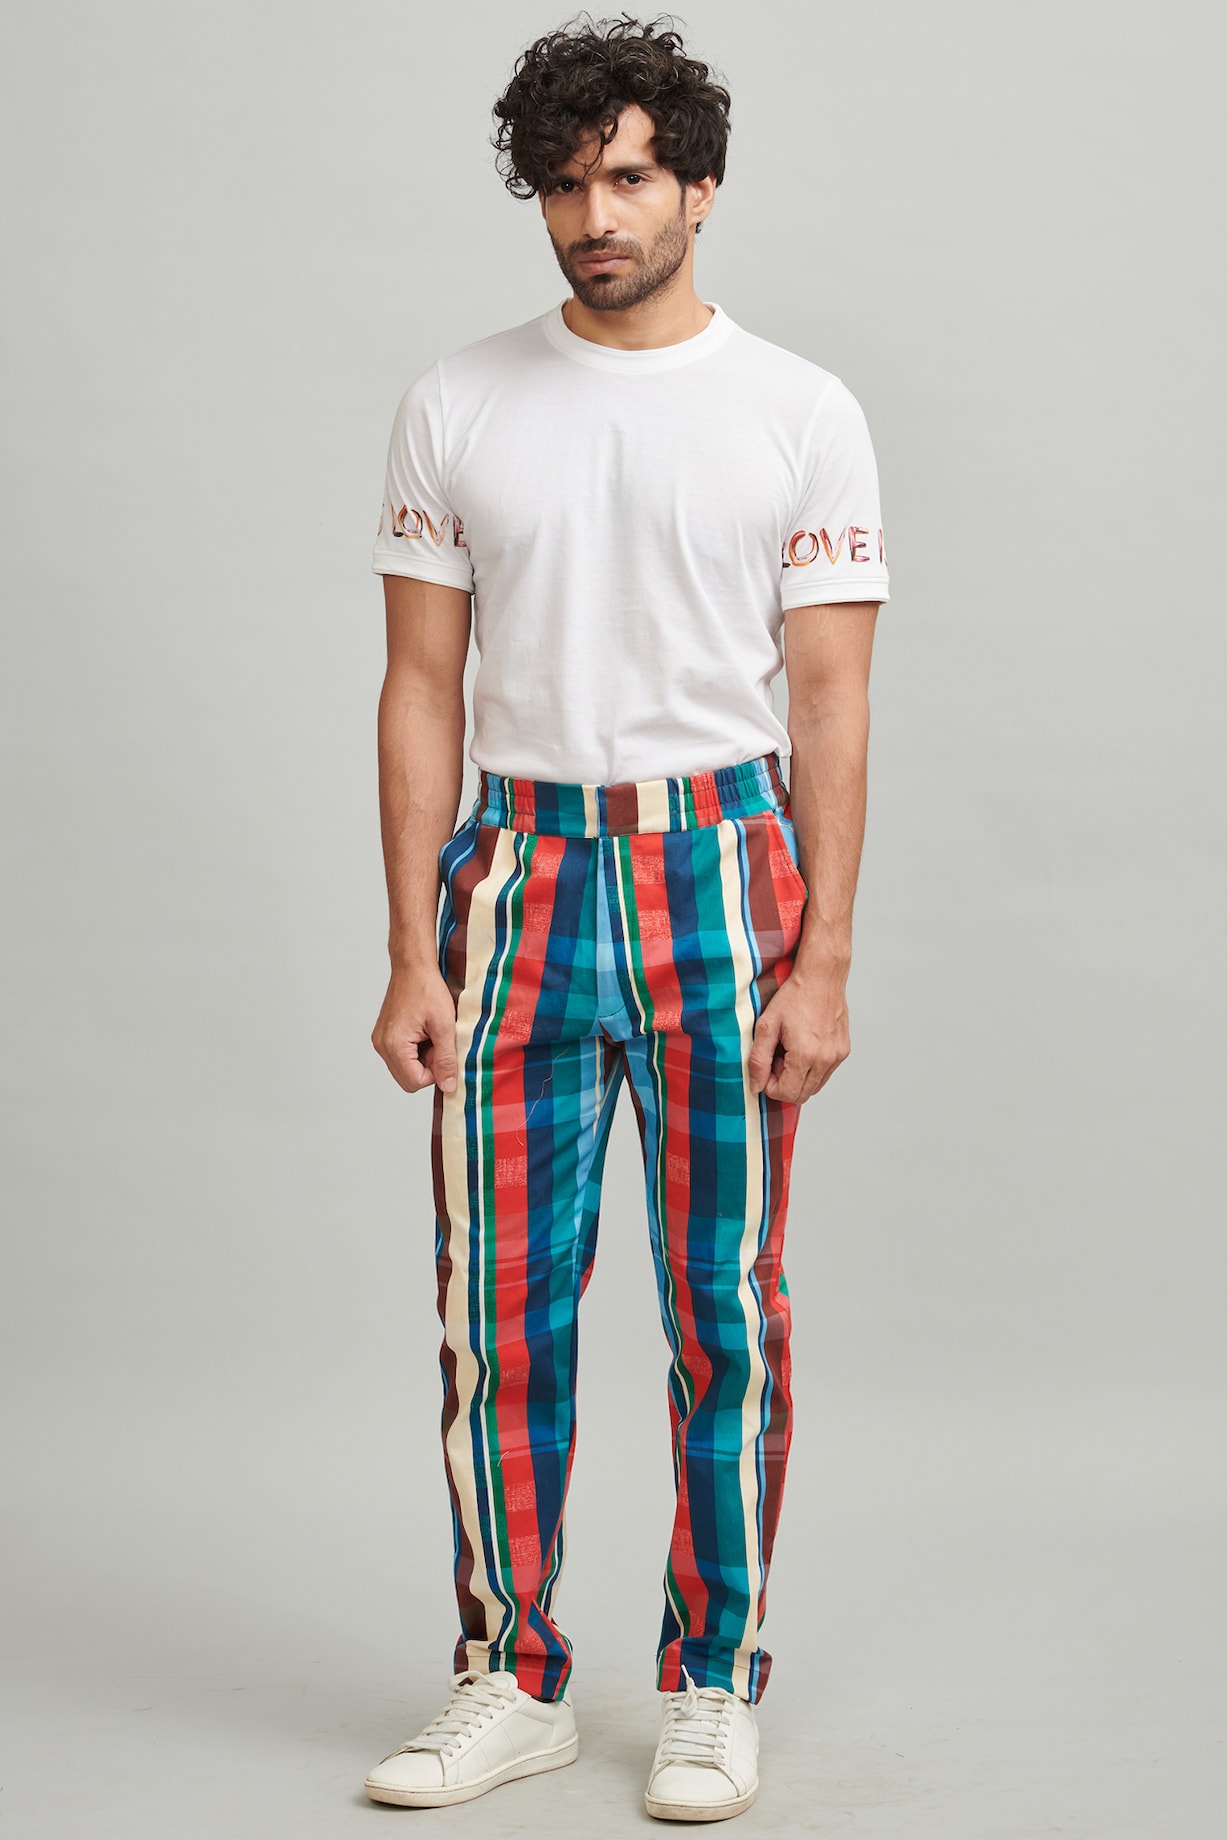 Multi Colored Striped Pants Design by Dash and Dot Men at Pernia's